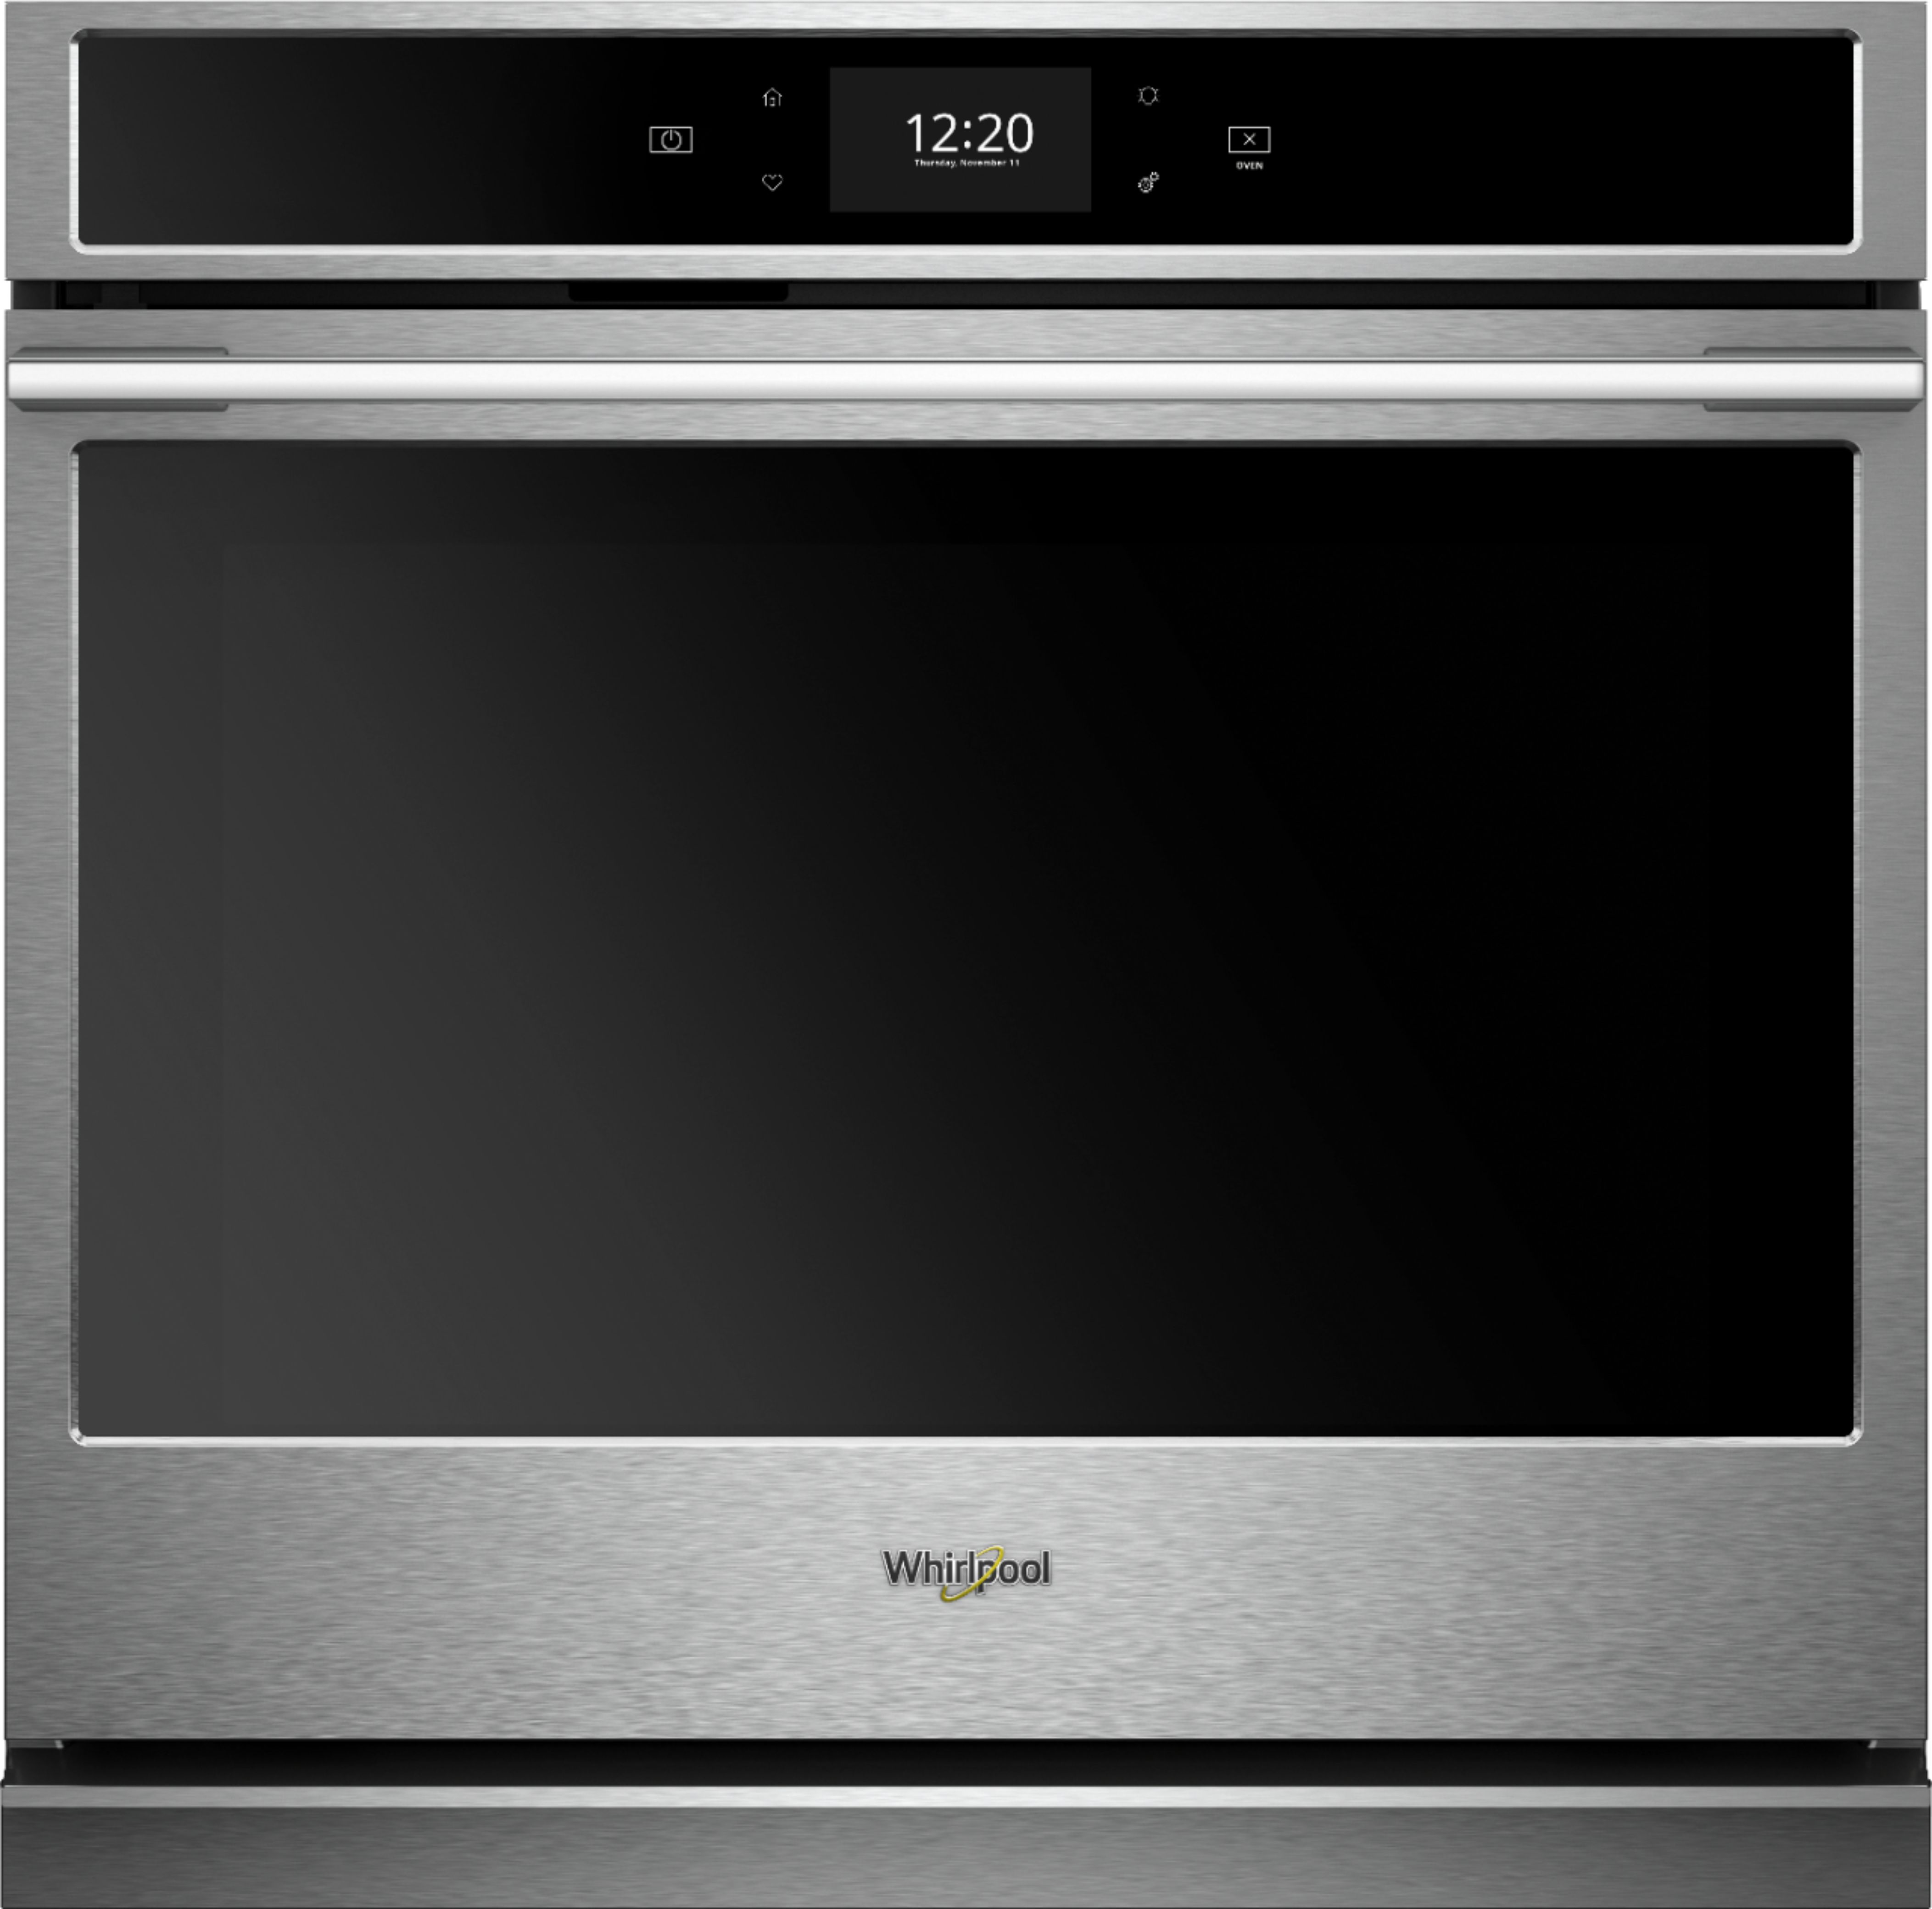 Whirlpool Convection Oven Manual